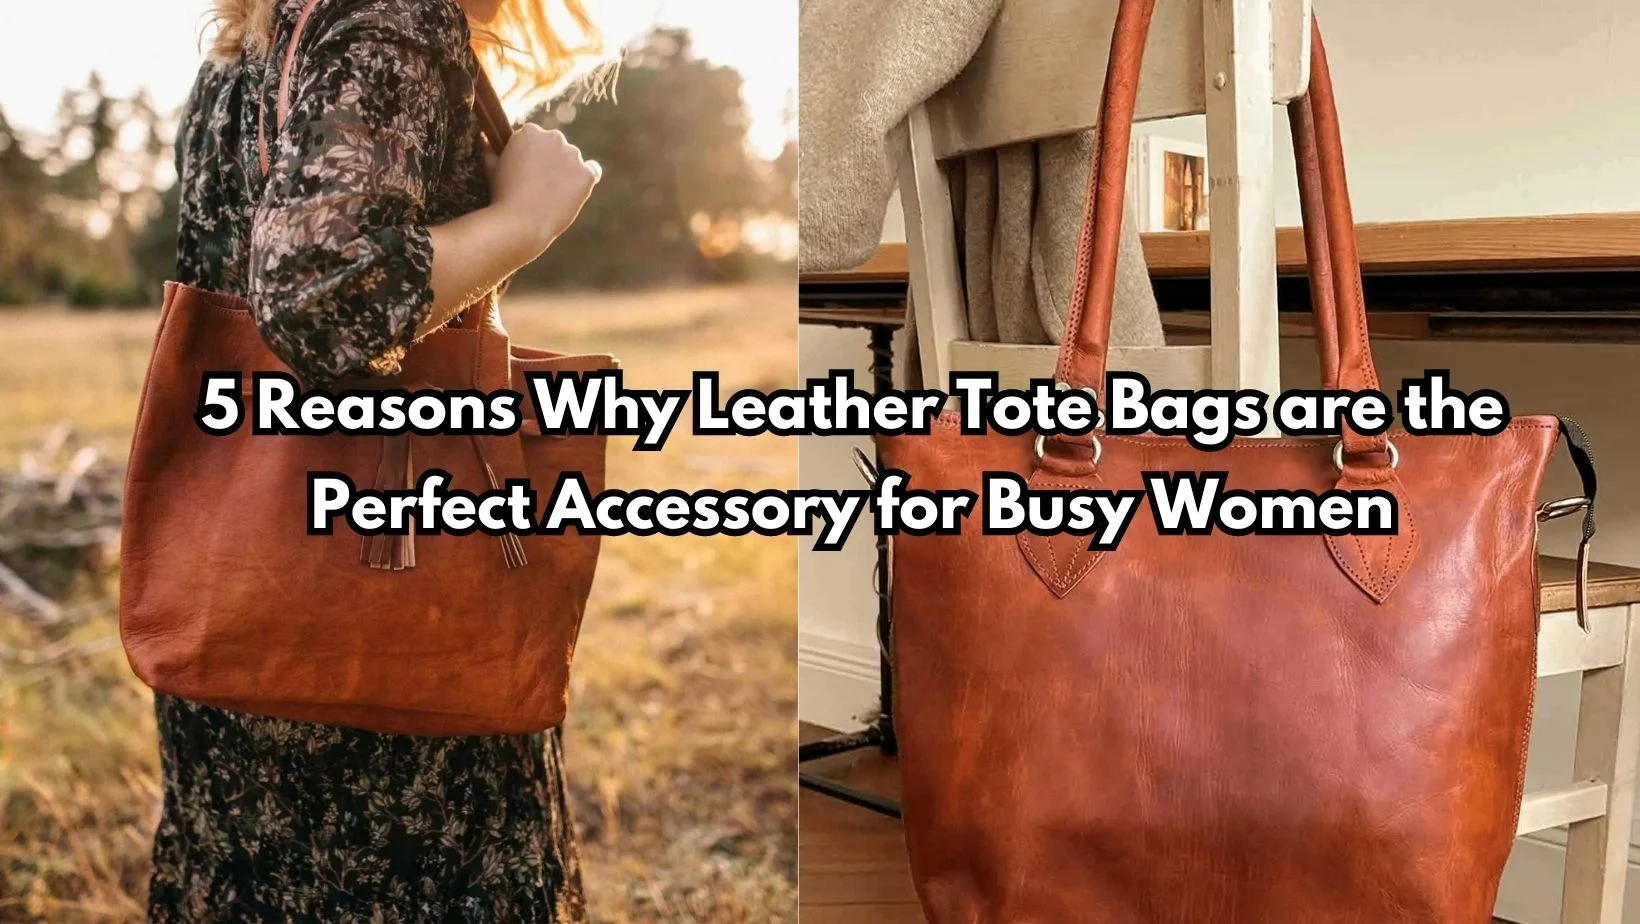 5 Reasons Why Leather Tote Bags are the Perfect Accessory for Busy Women